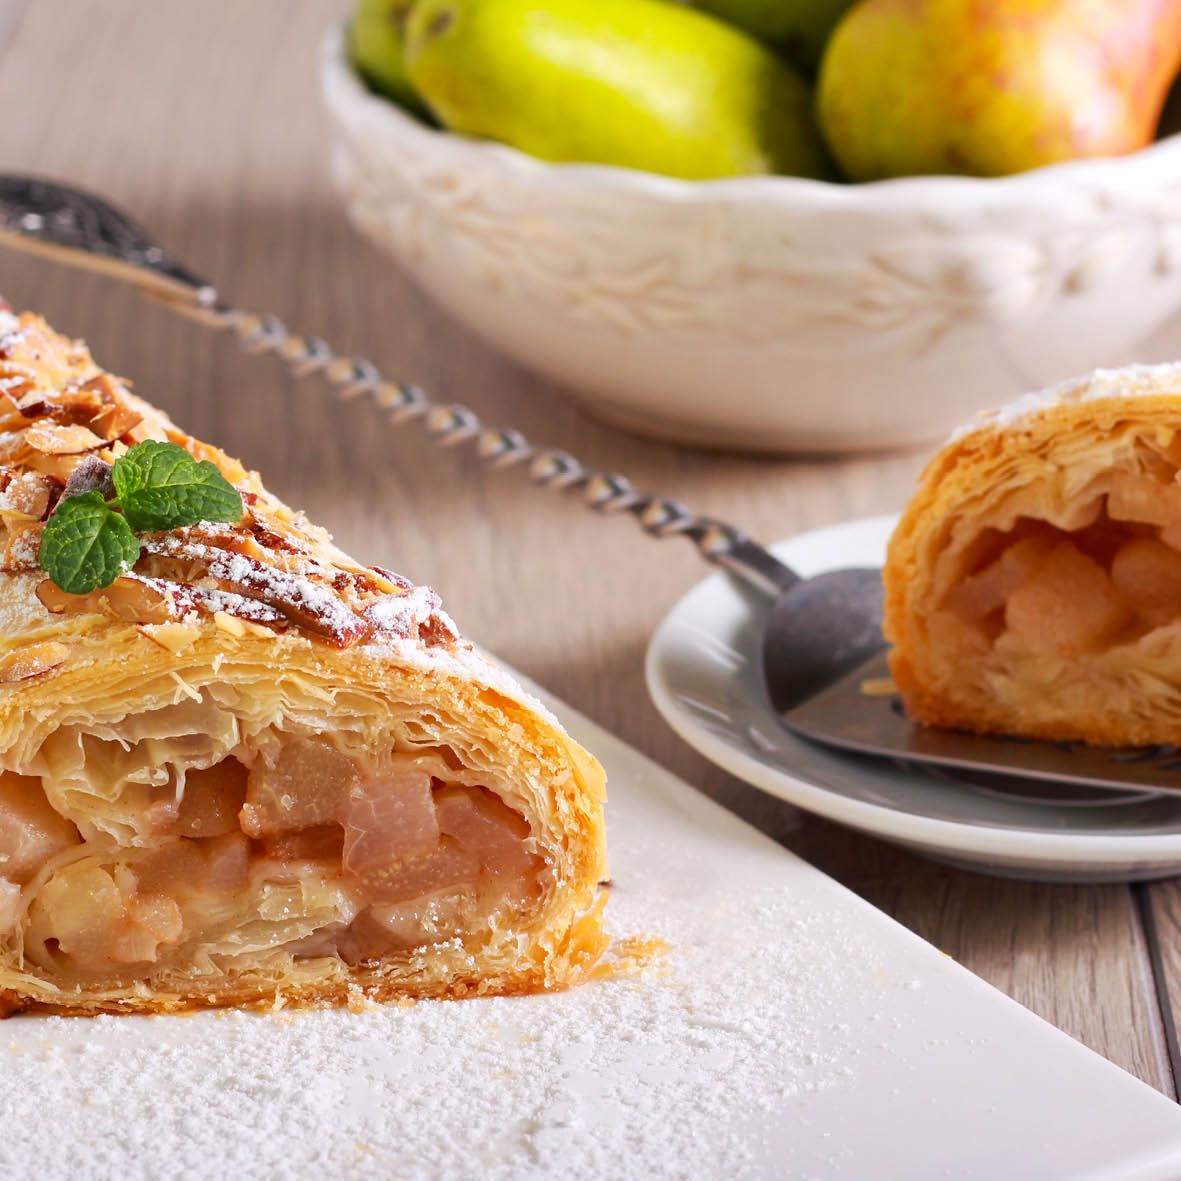 Pear_and_Almond_Strudel.jpg